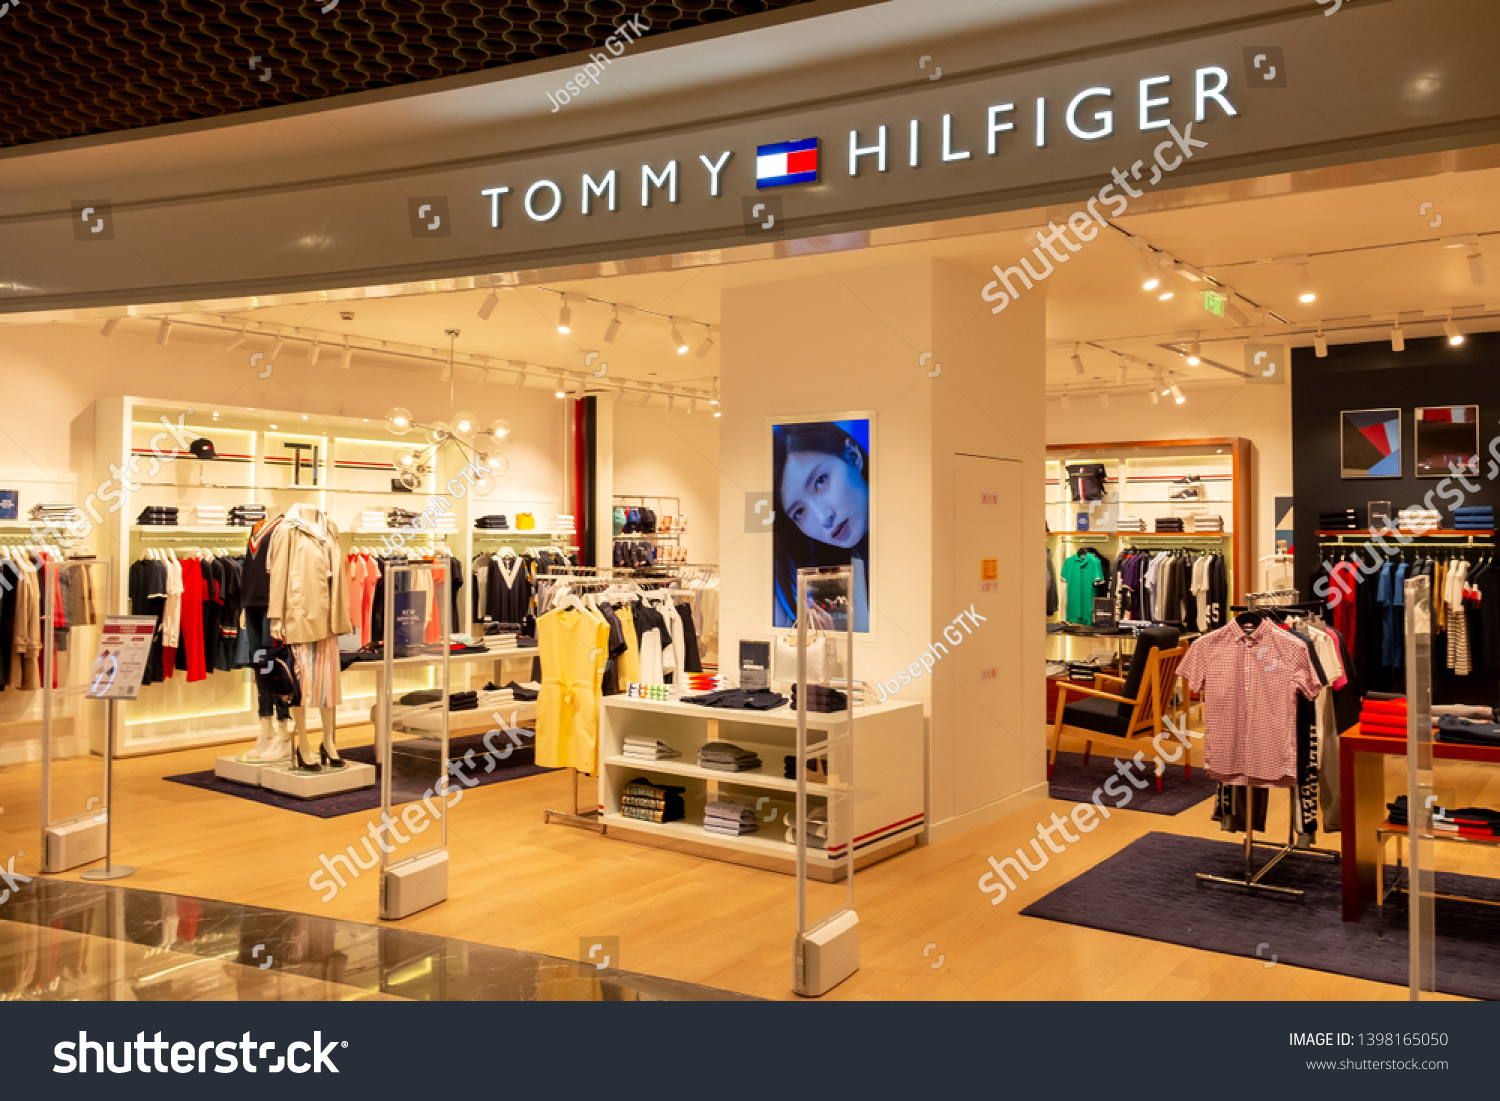 tommy hilfiger factory store coupon